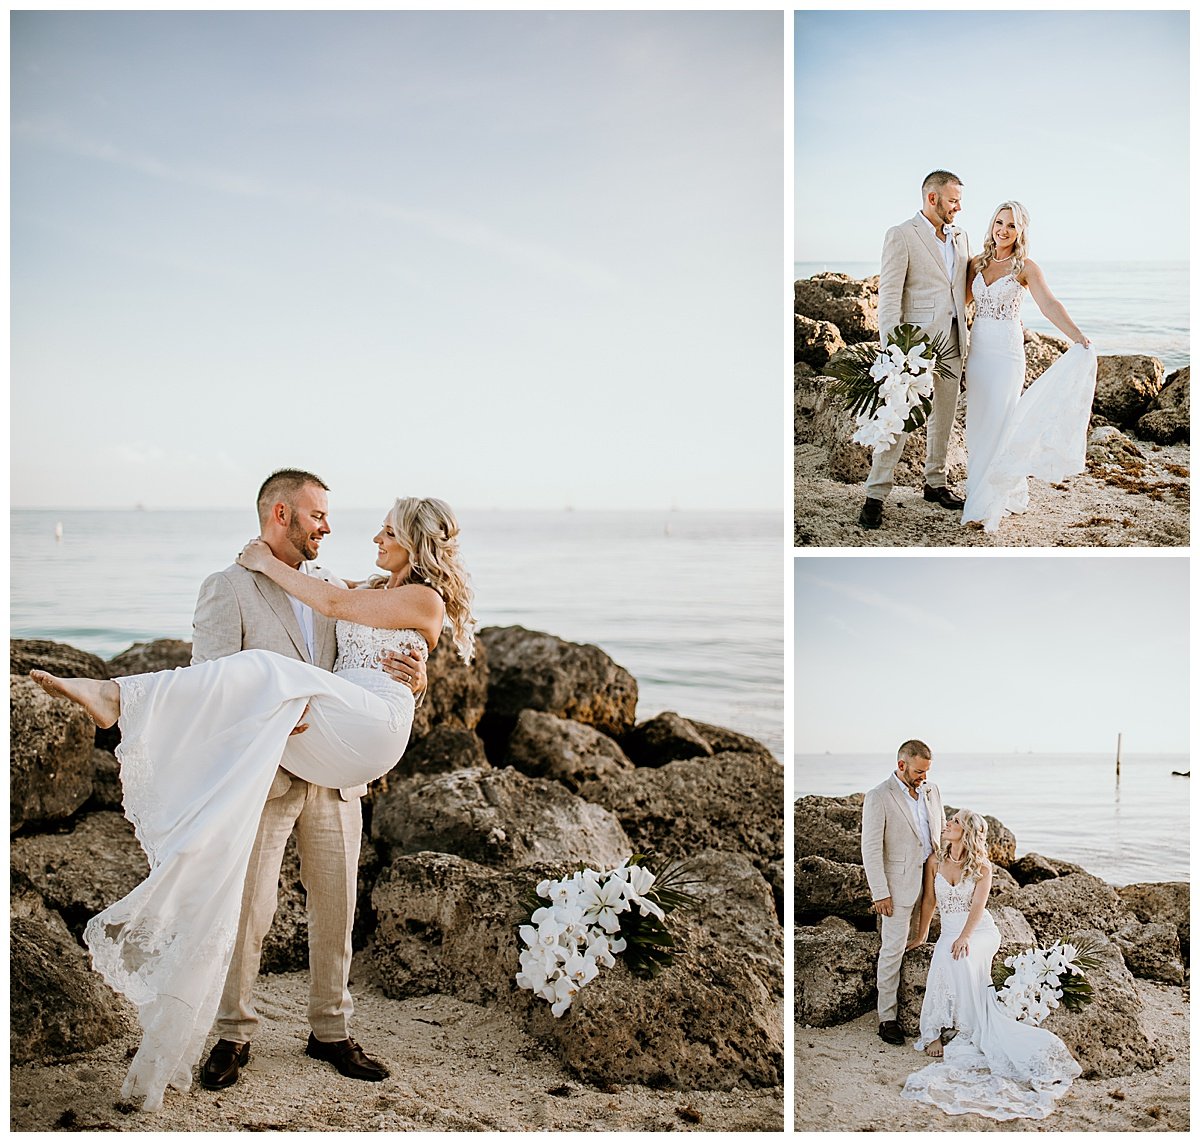 Couple wedding portraits at Fort Zachary Taylor Key West